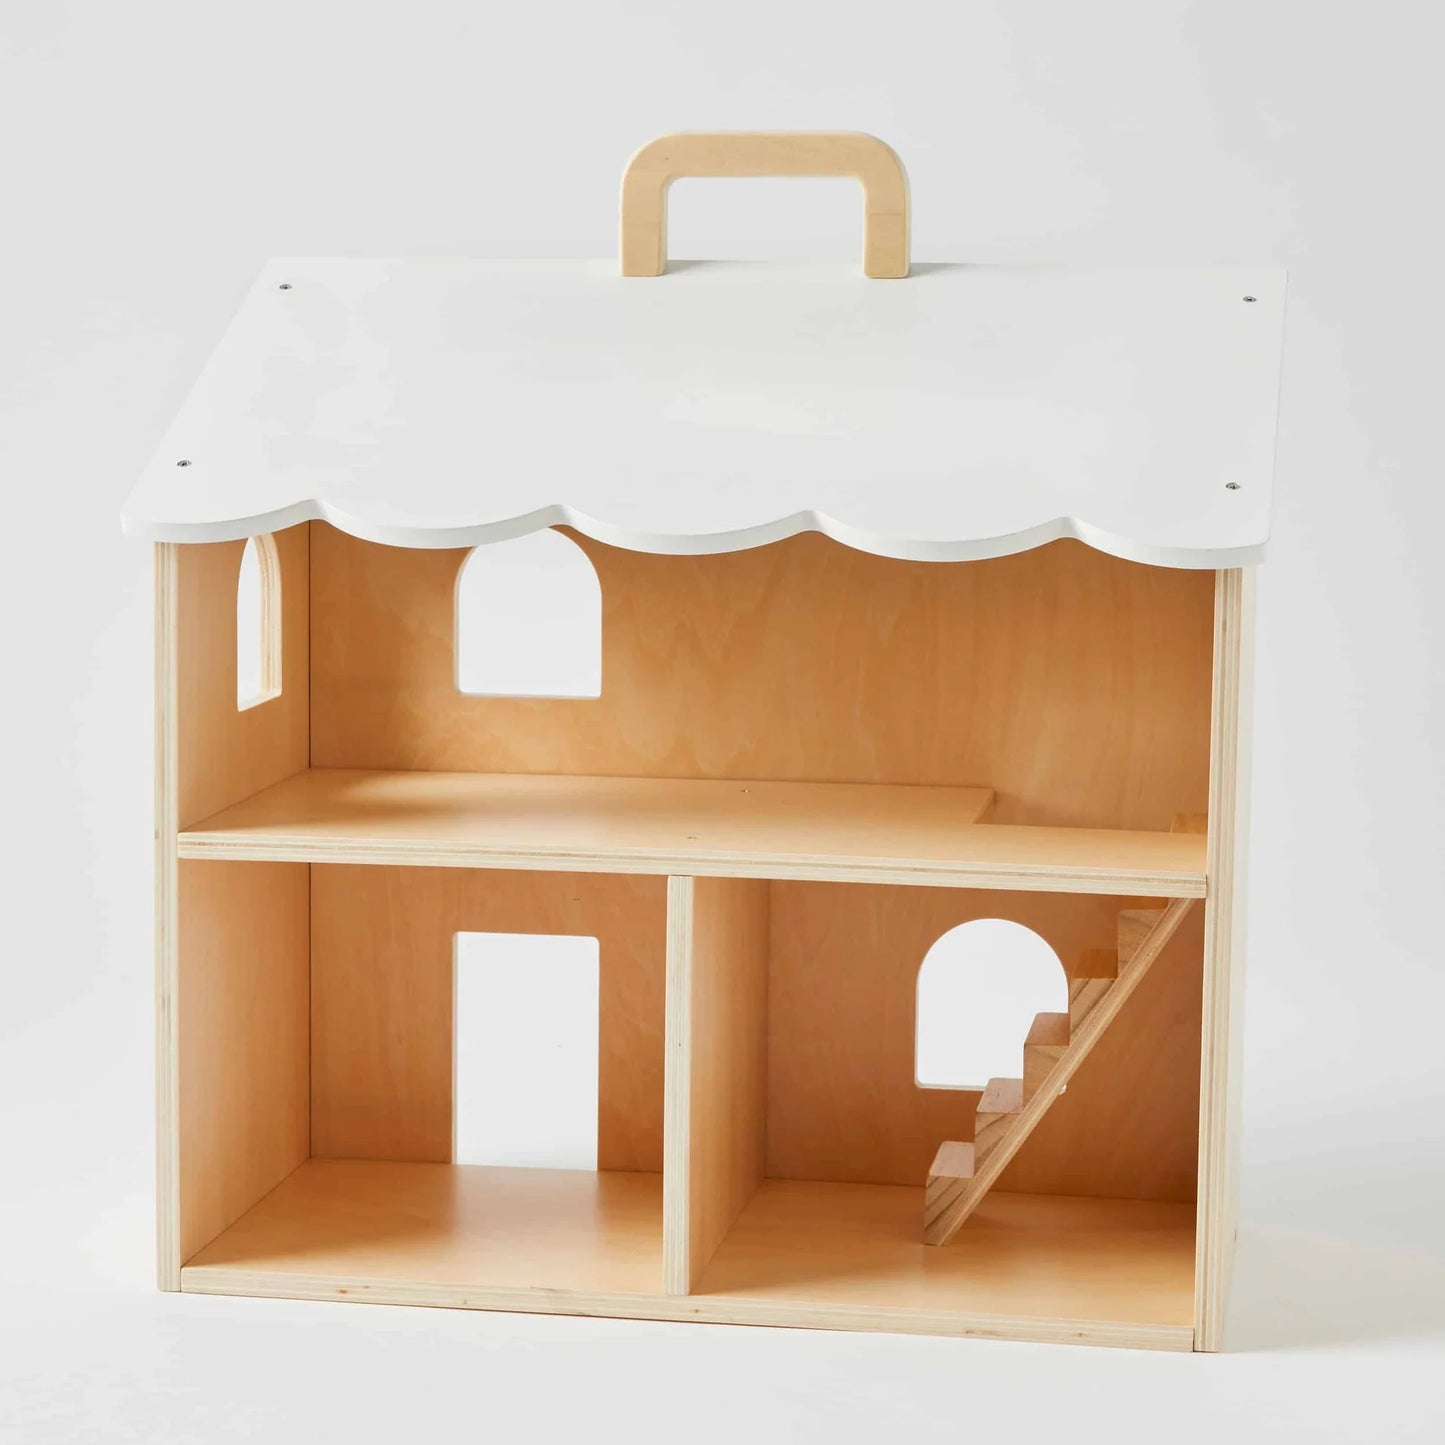 Nordic Kids Wooden Doll House